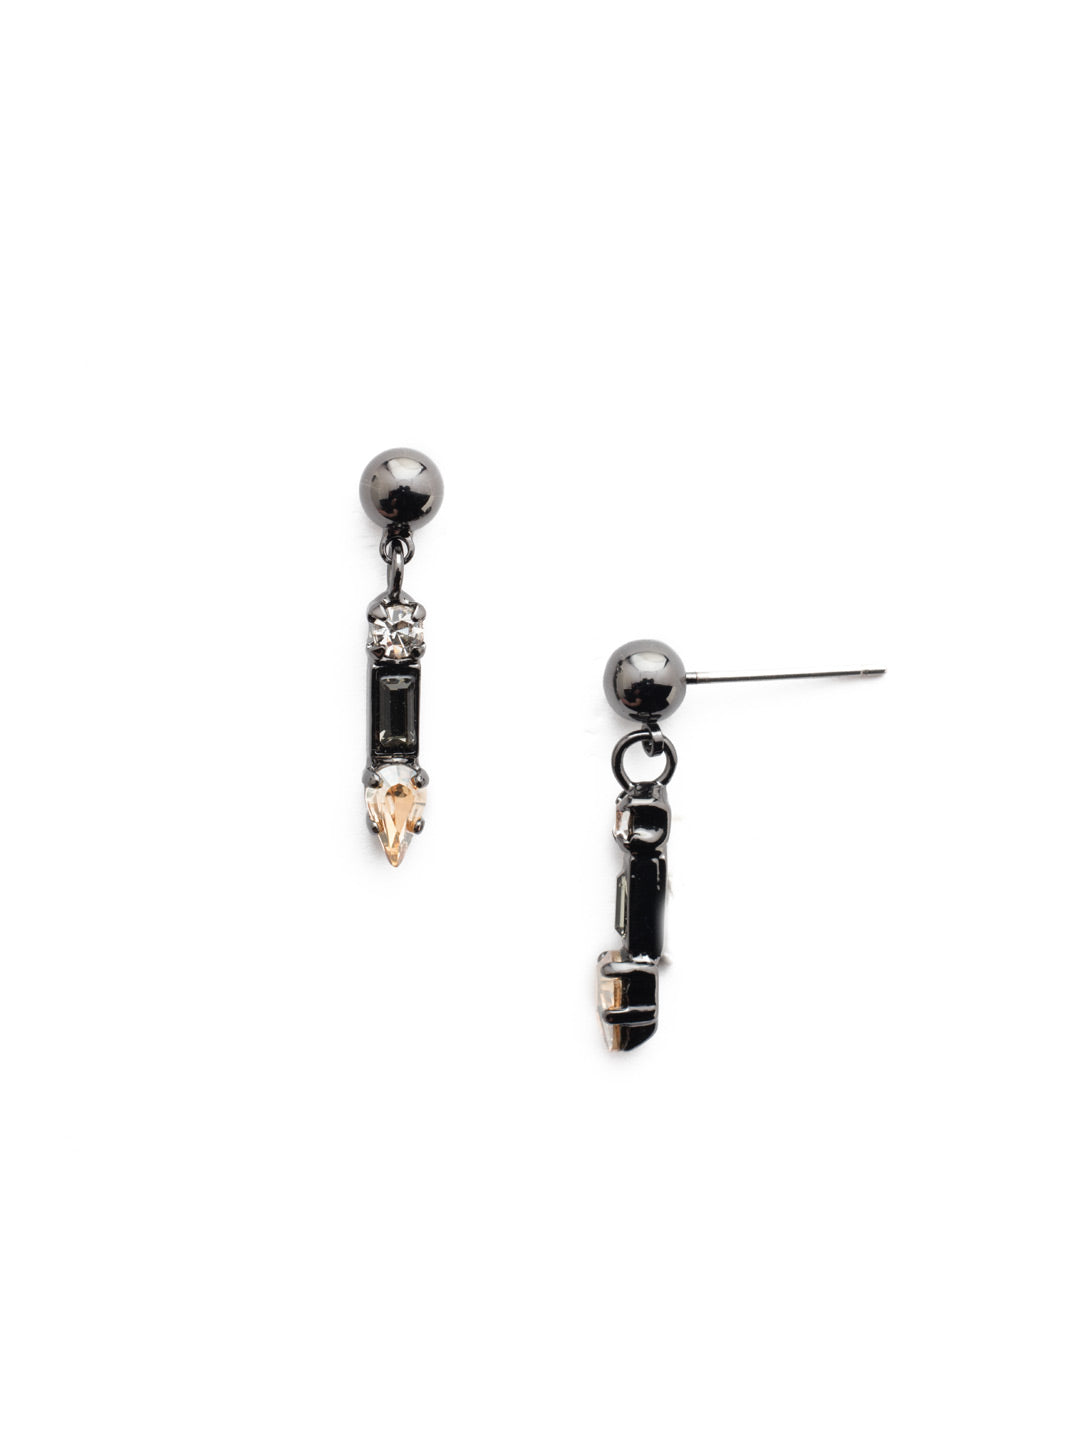 Mona Dangle Earrings - EEU6GMGNS - Sometimes a little dab will do 'ya. Demure, yet stunning, the Mona Dangle Earrings are perfect for any outfit occasion. From Sorrelli's Golden Shadow collection in our Gun Metal finish.